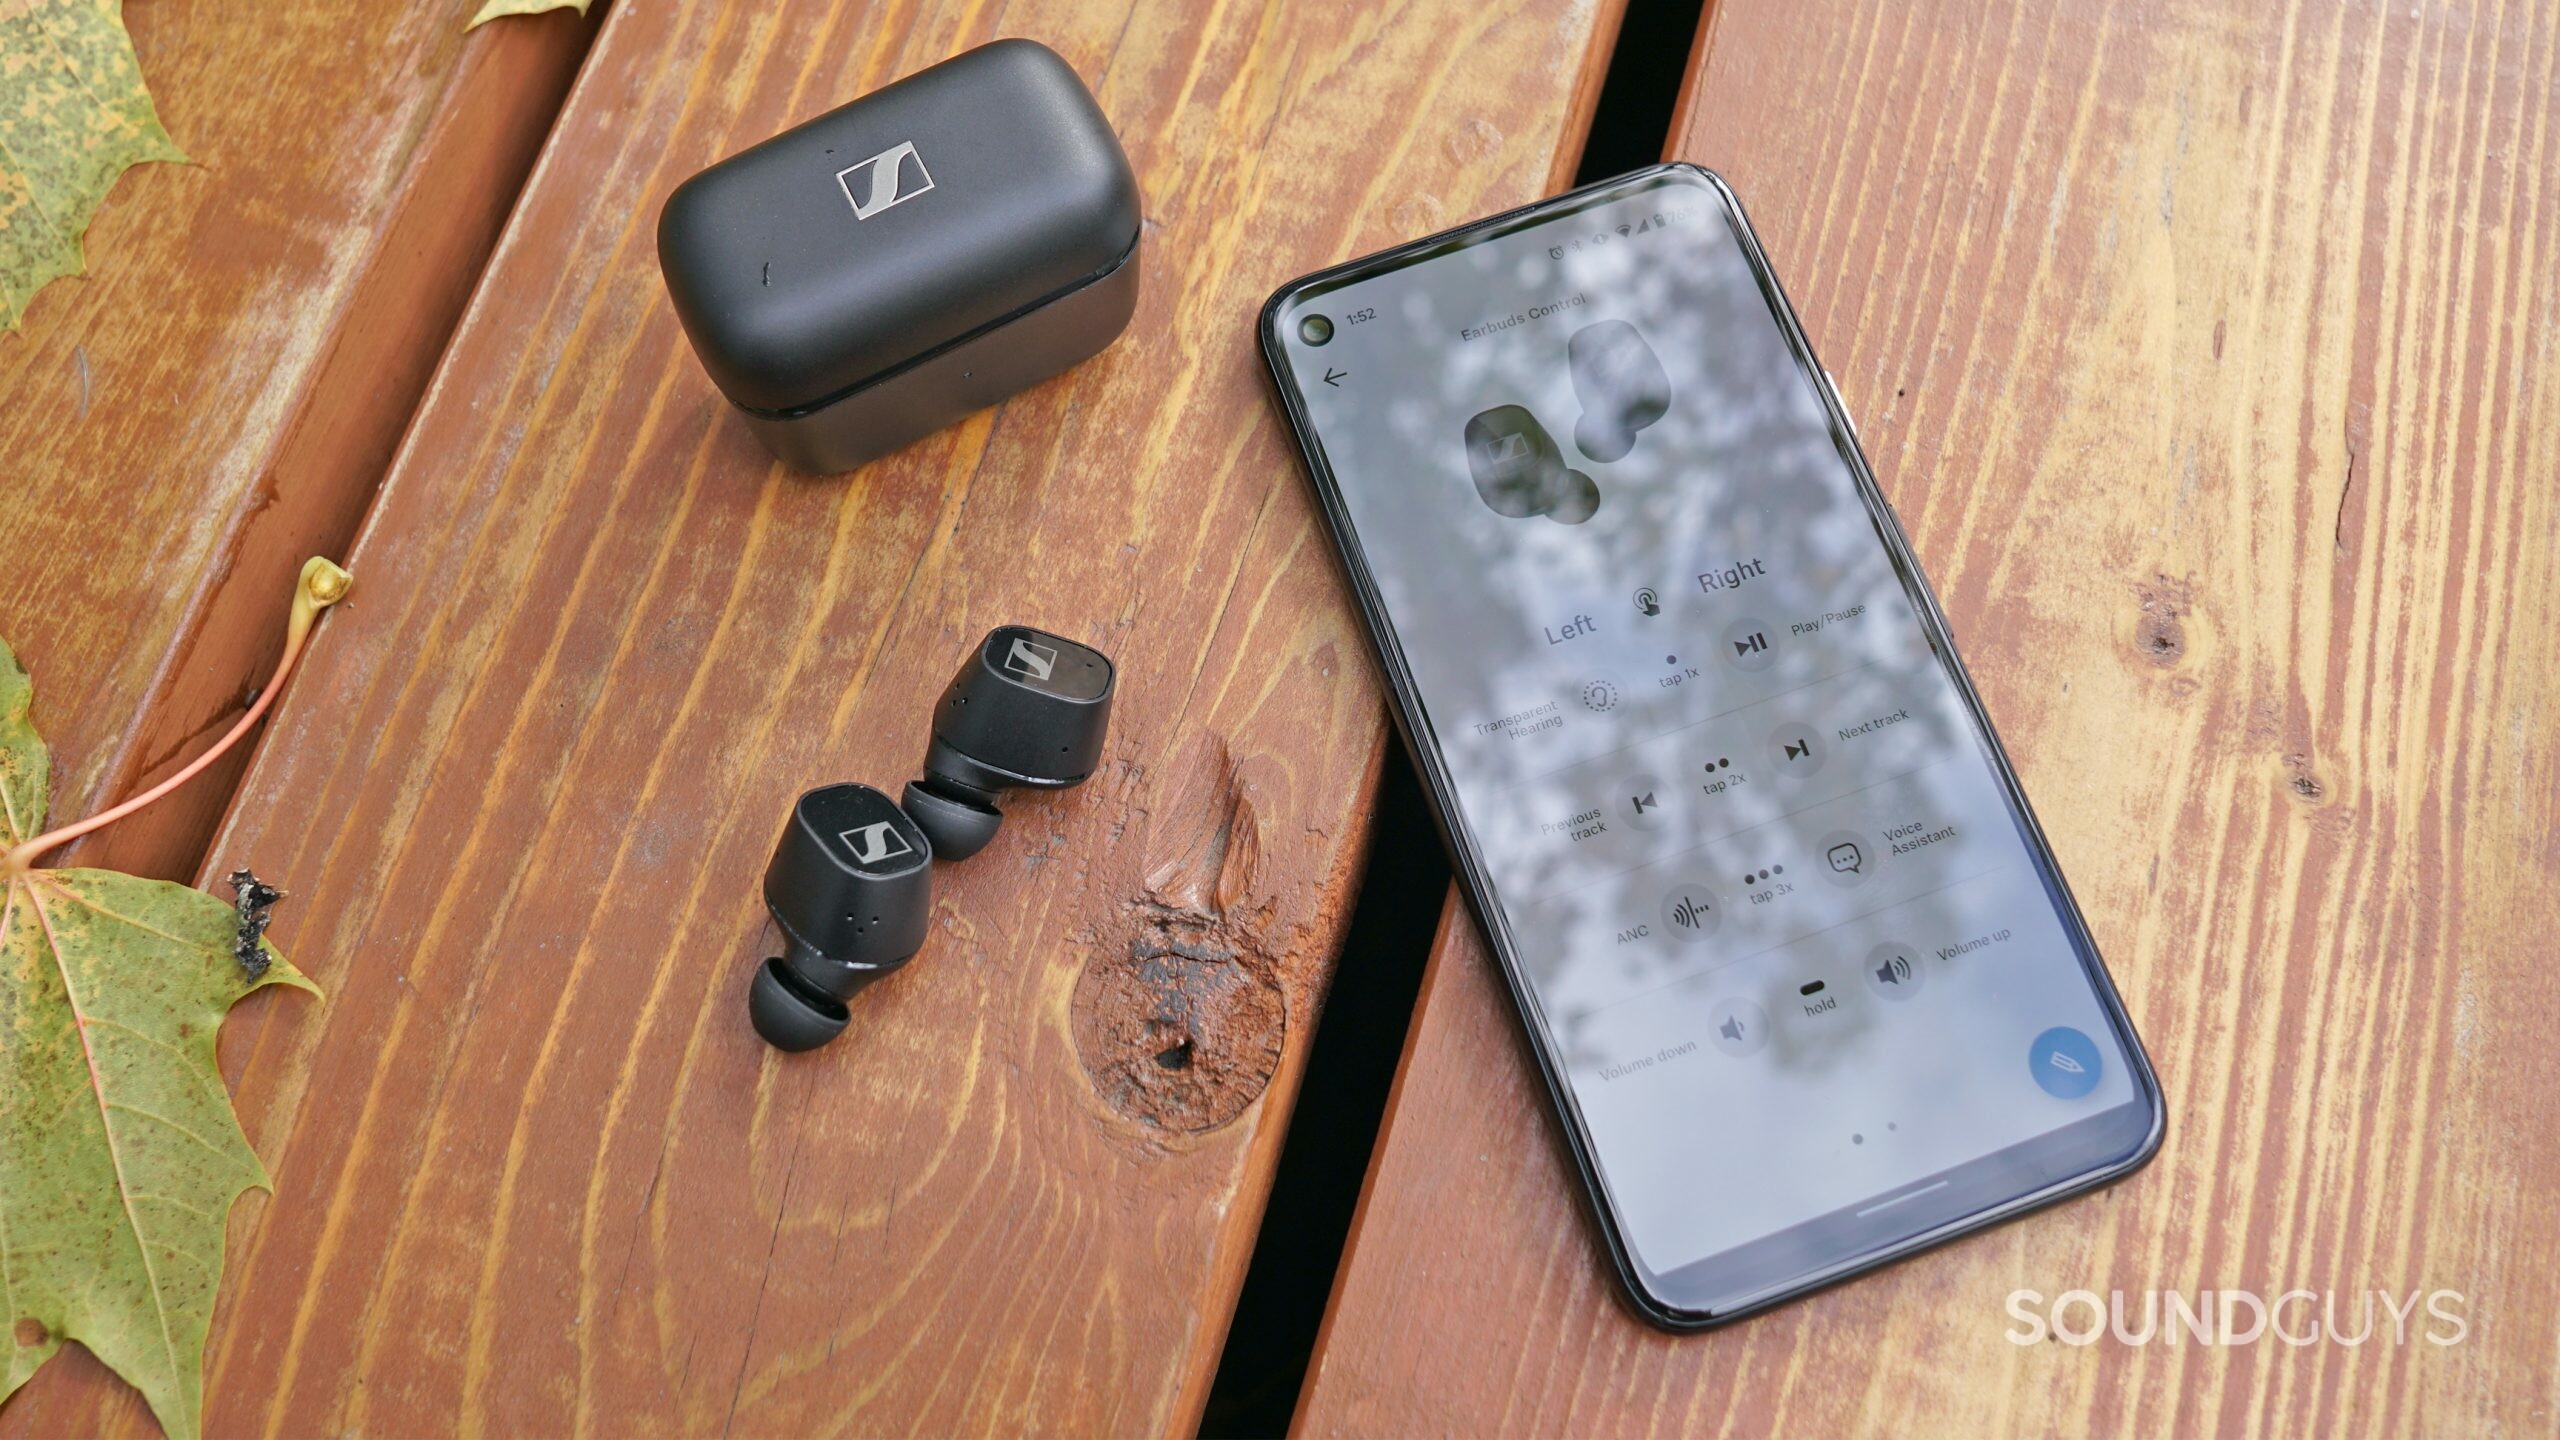 The Sennheiser CX Plus True Wireless earbuds lay on a wooden bench outside, paired to a Google Pixel 4a running the Sennheiser Smart Control app.